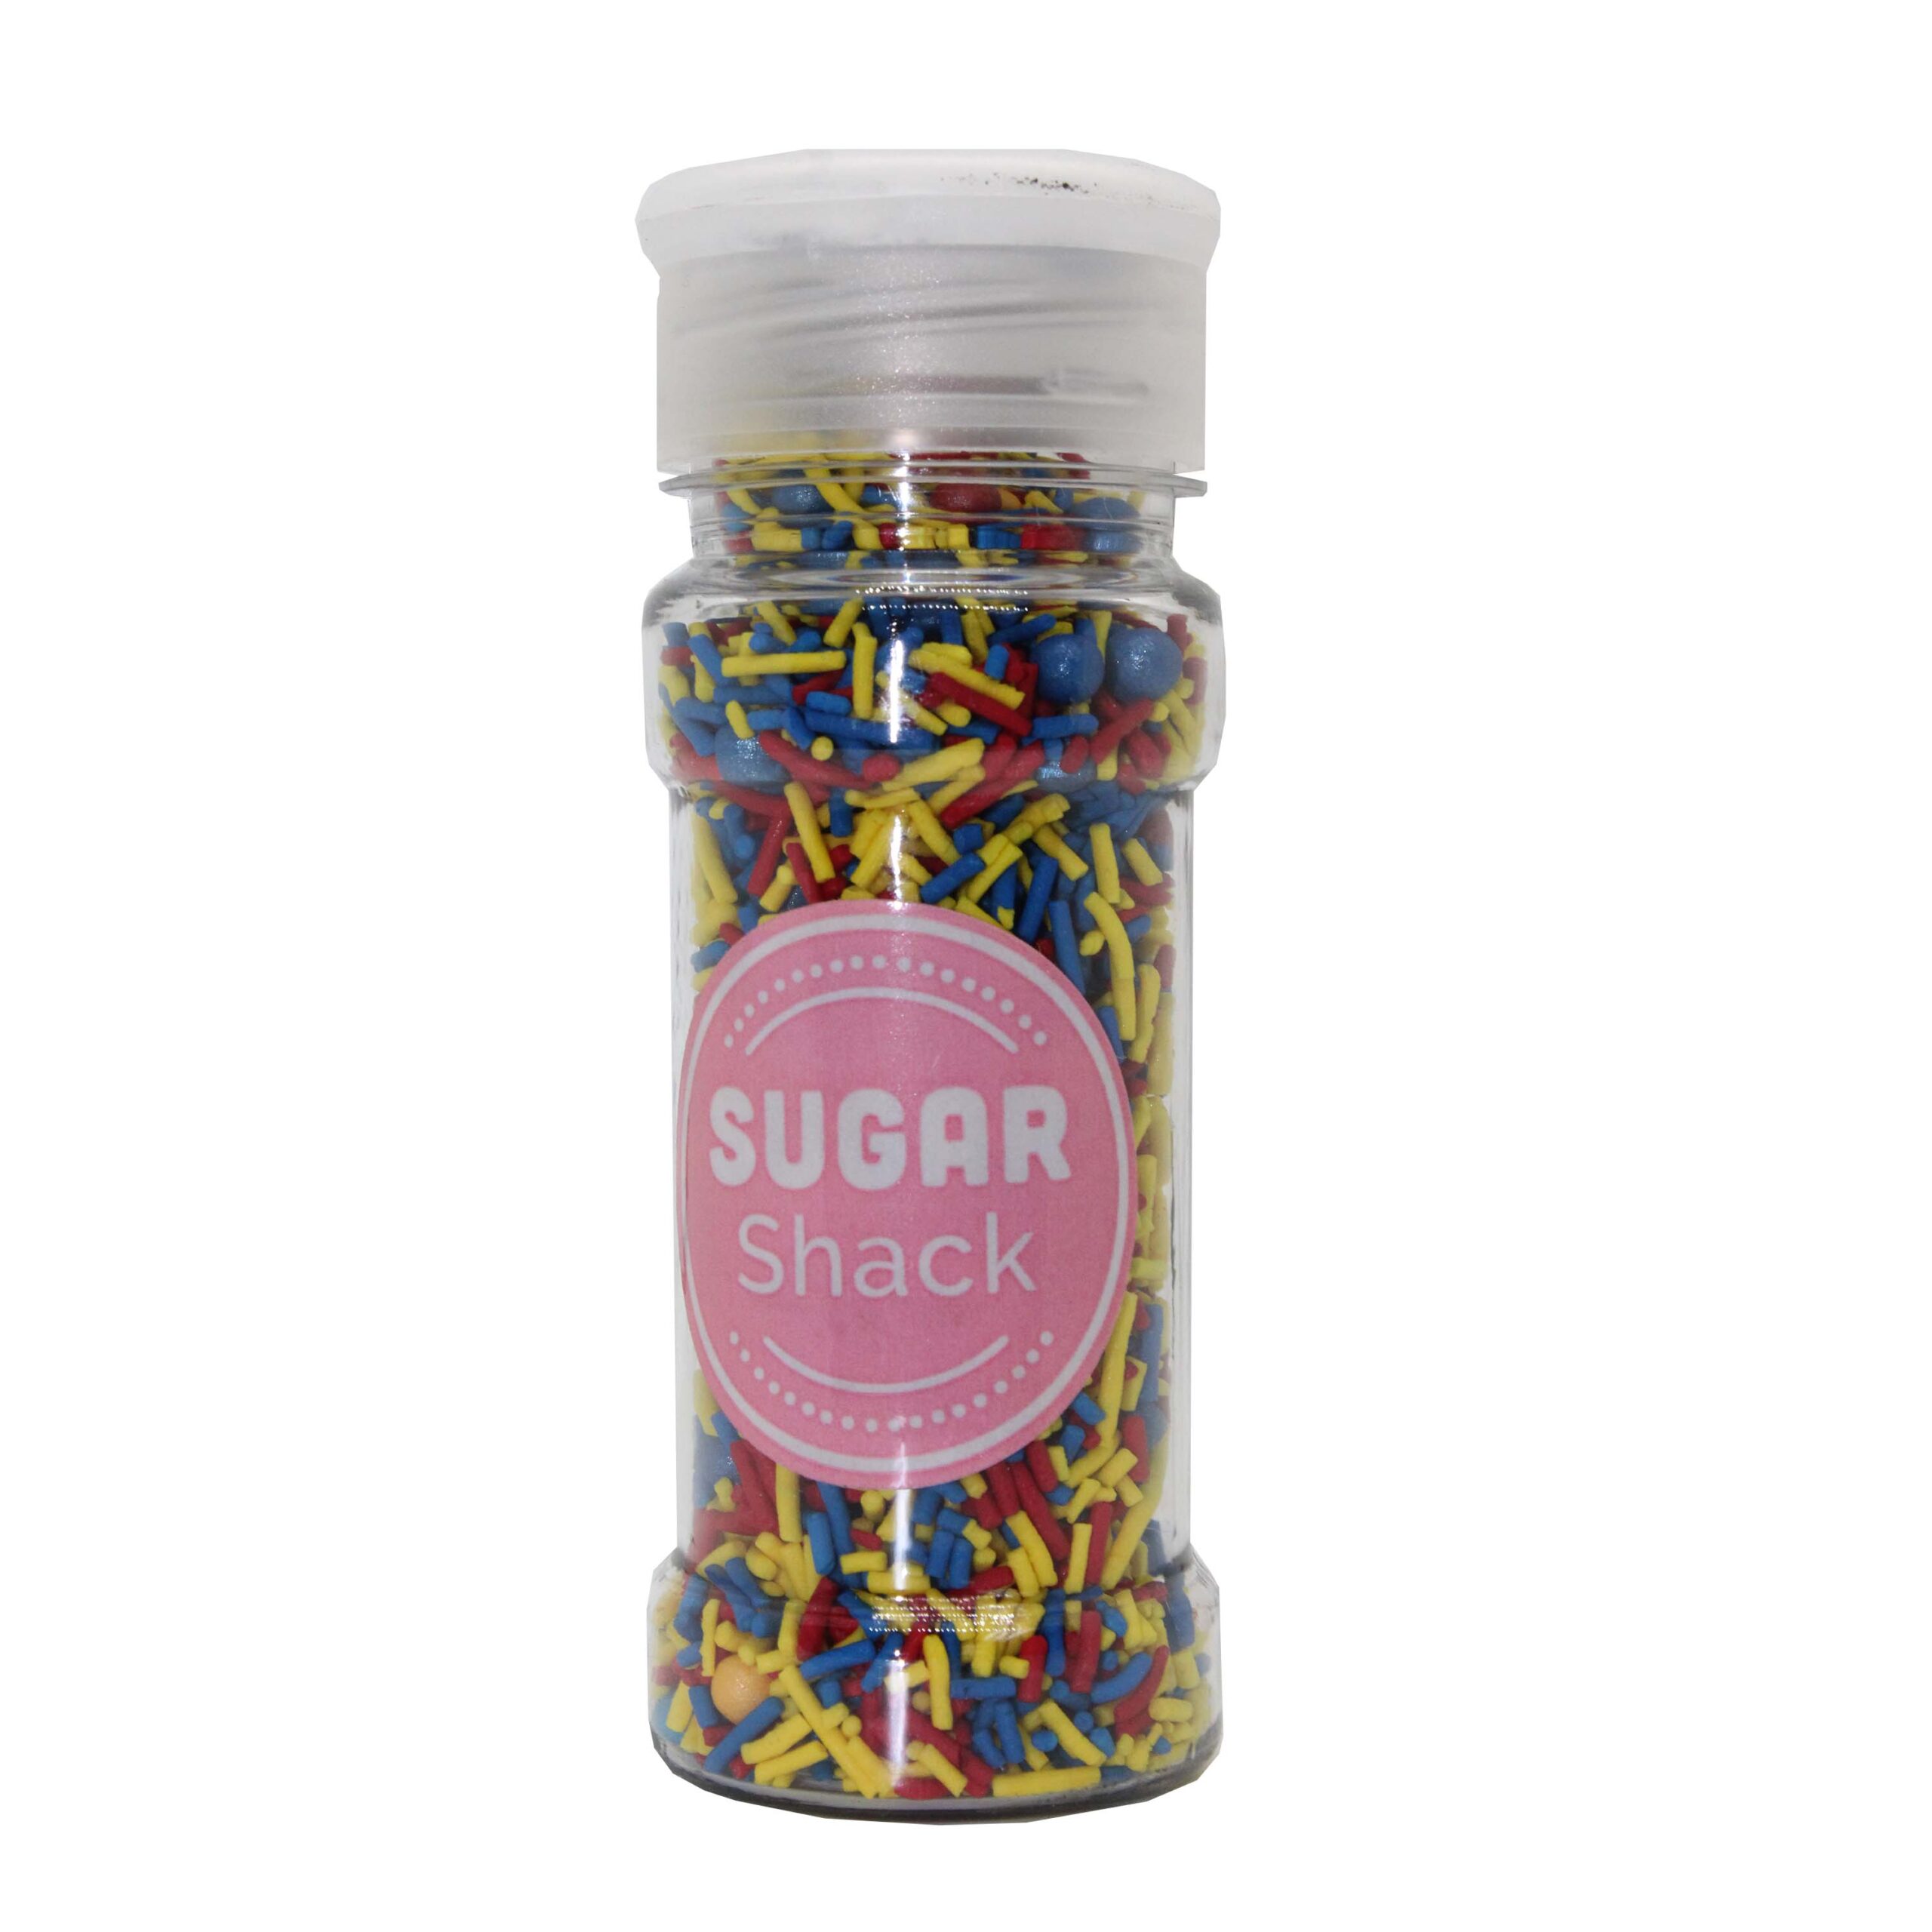 NONPAREILS  #5
MIXED SPRINKLES
100g PRIMARY
COLOUR PEARLS